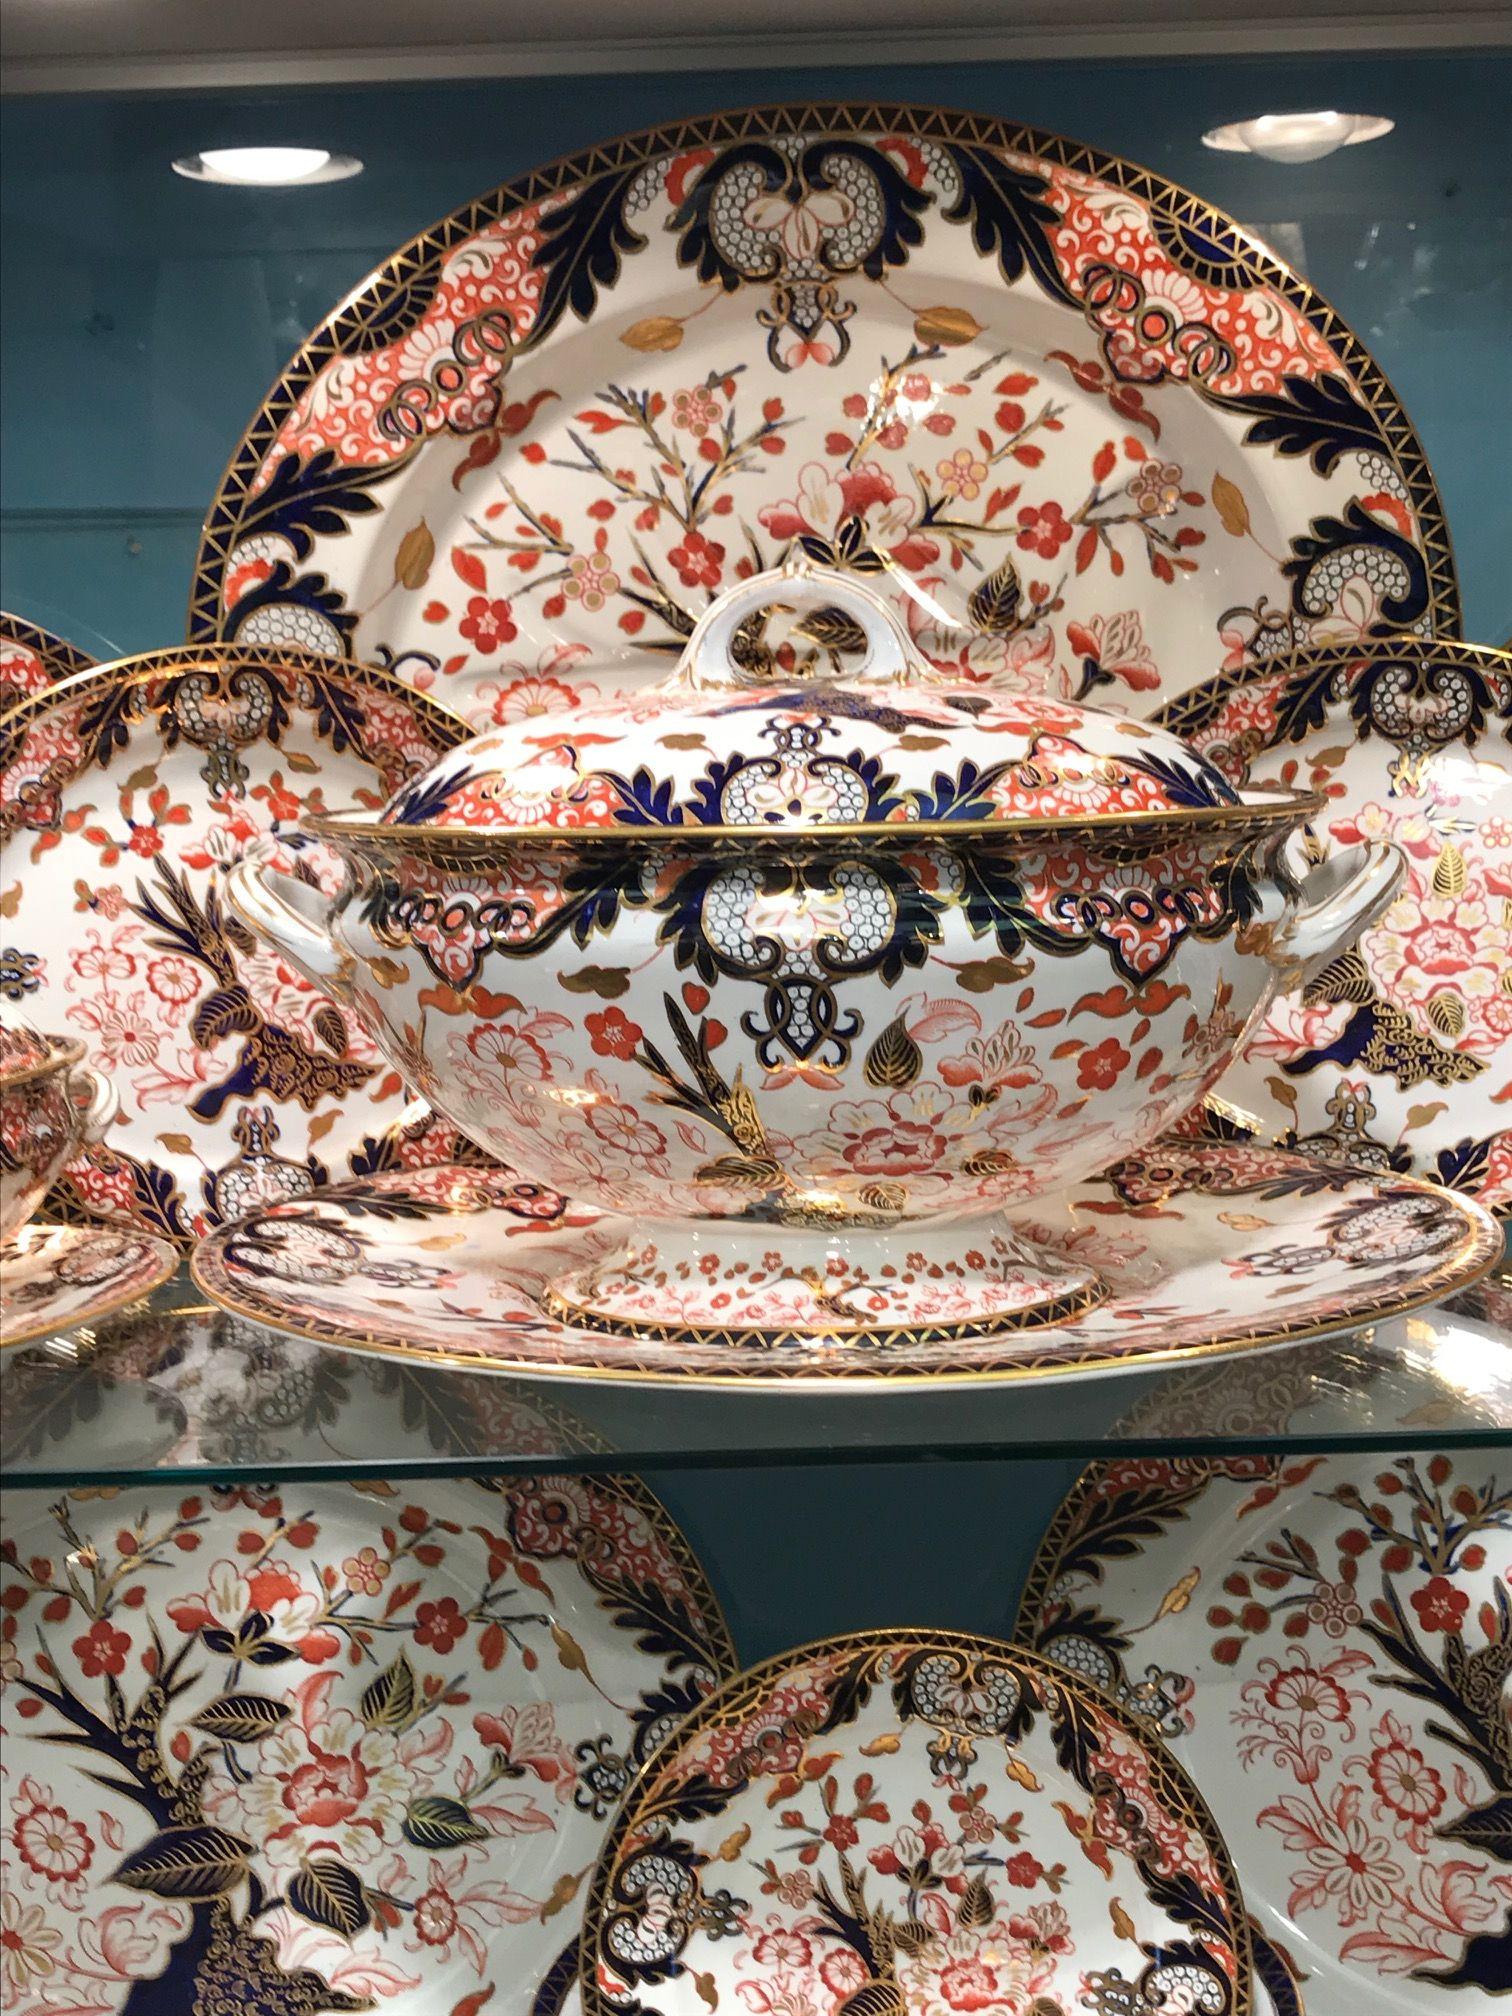 Royal crown derby hybrid porcelain/earthenware Kings pattern large dinner service for 24 people in amazing condition.
Consisting of:
Two soup tureens/lids/stands
Three vegetable dishes/lids
Two sauce tureen/lid/Stand
Two sauce